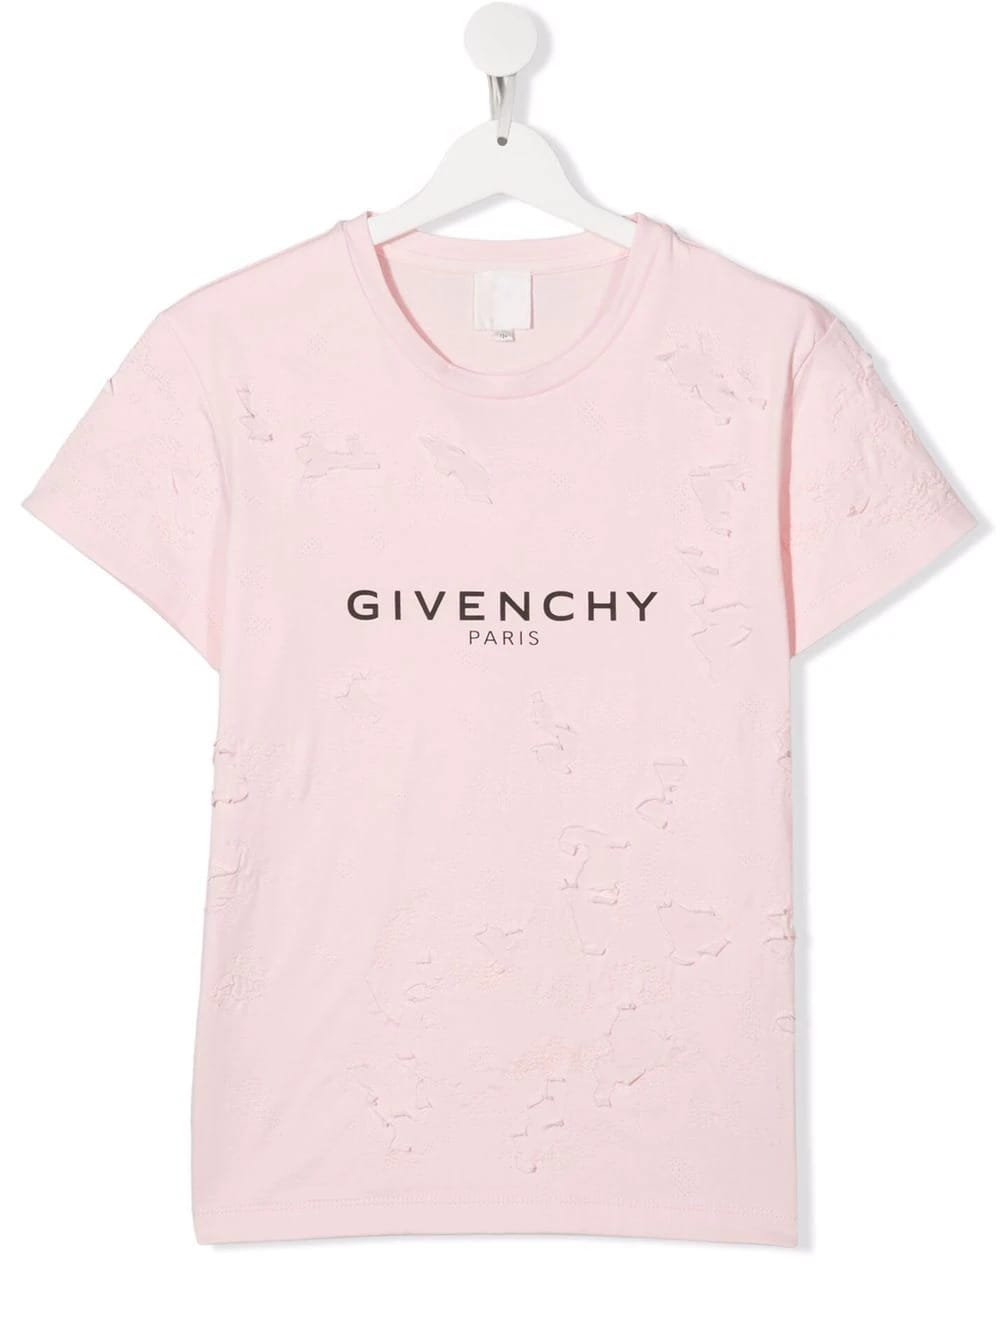 Givenchy Kids Pink T-shirt With Logo And Distressed 3d Effect Details